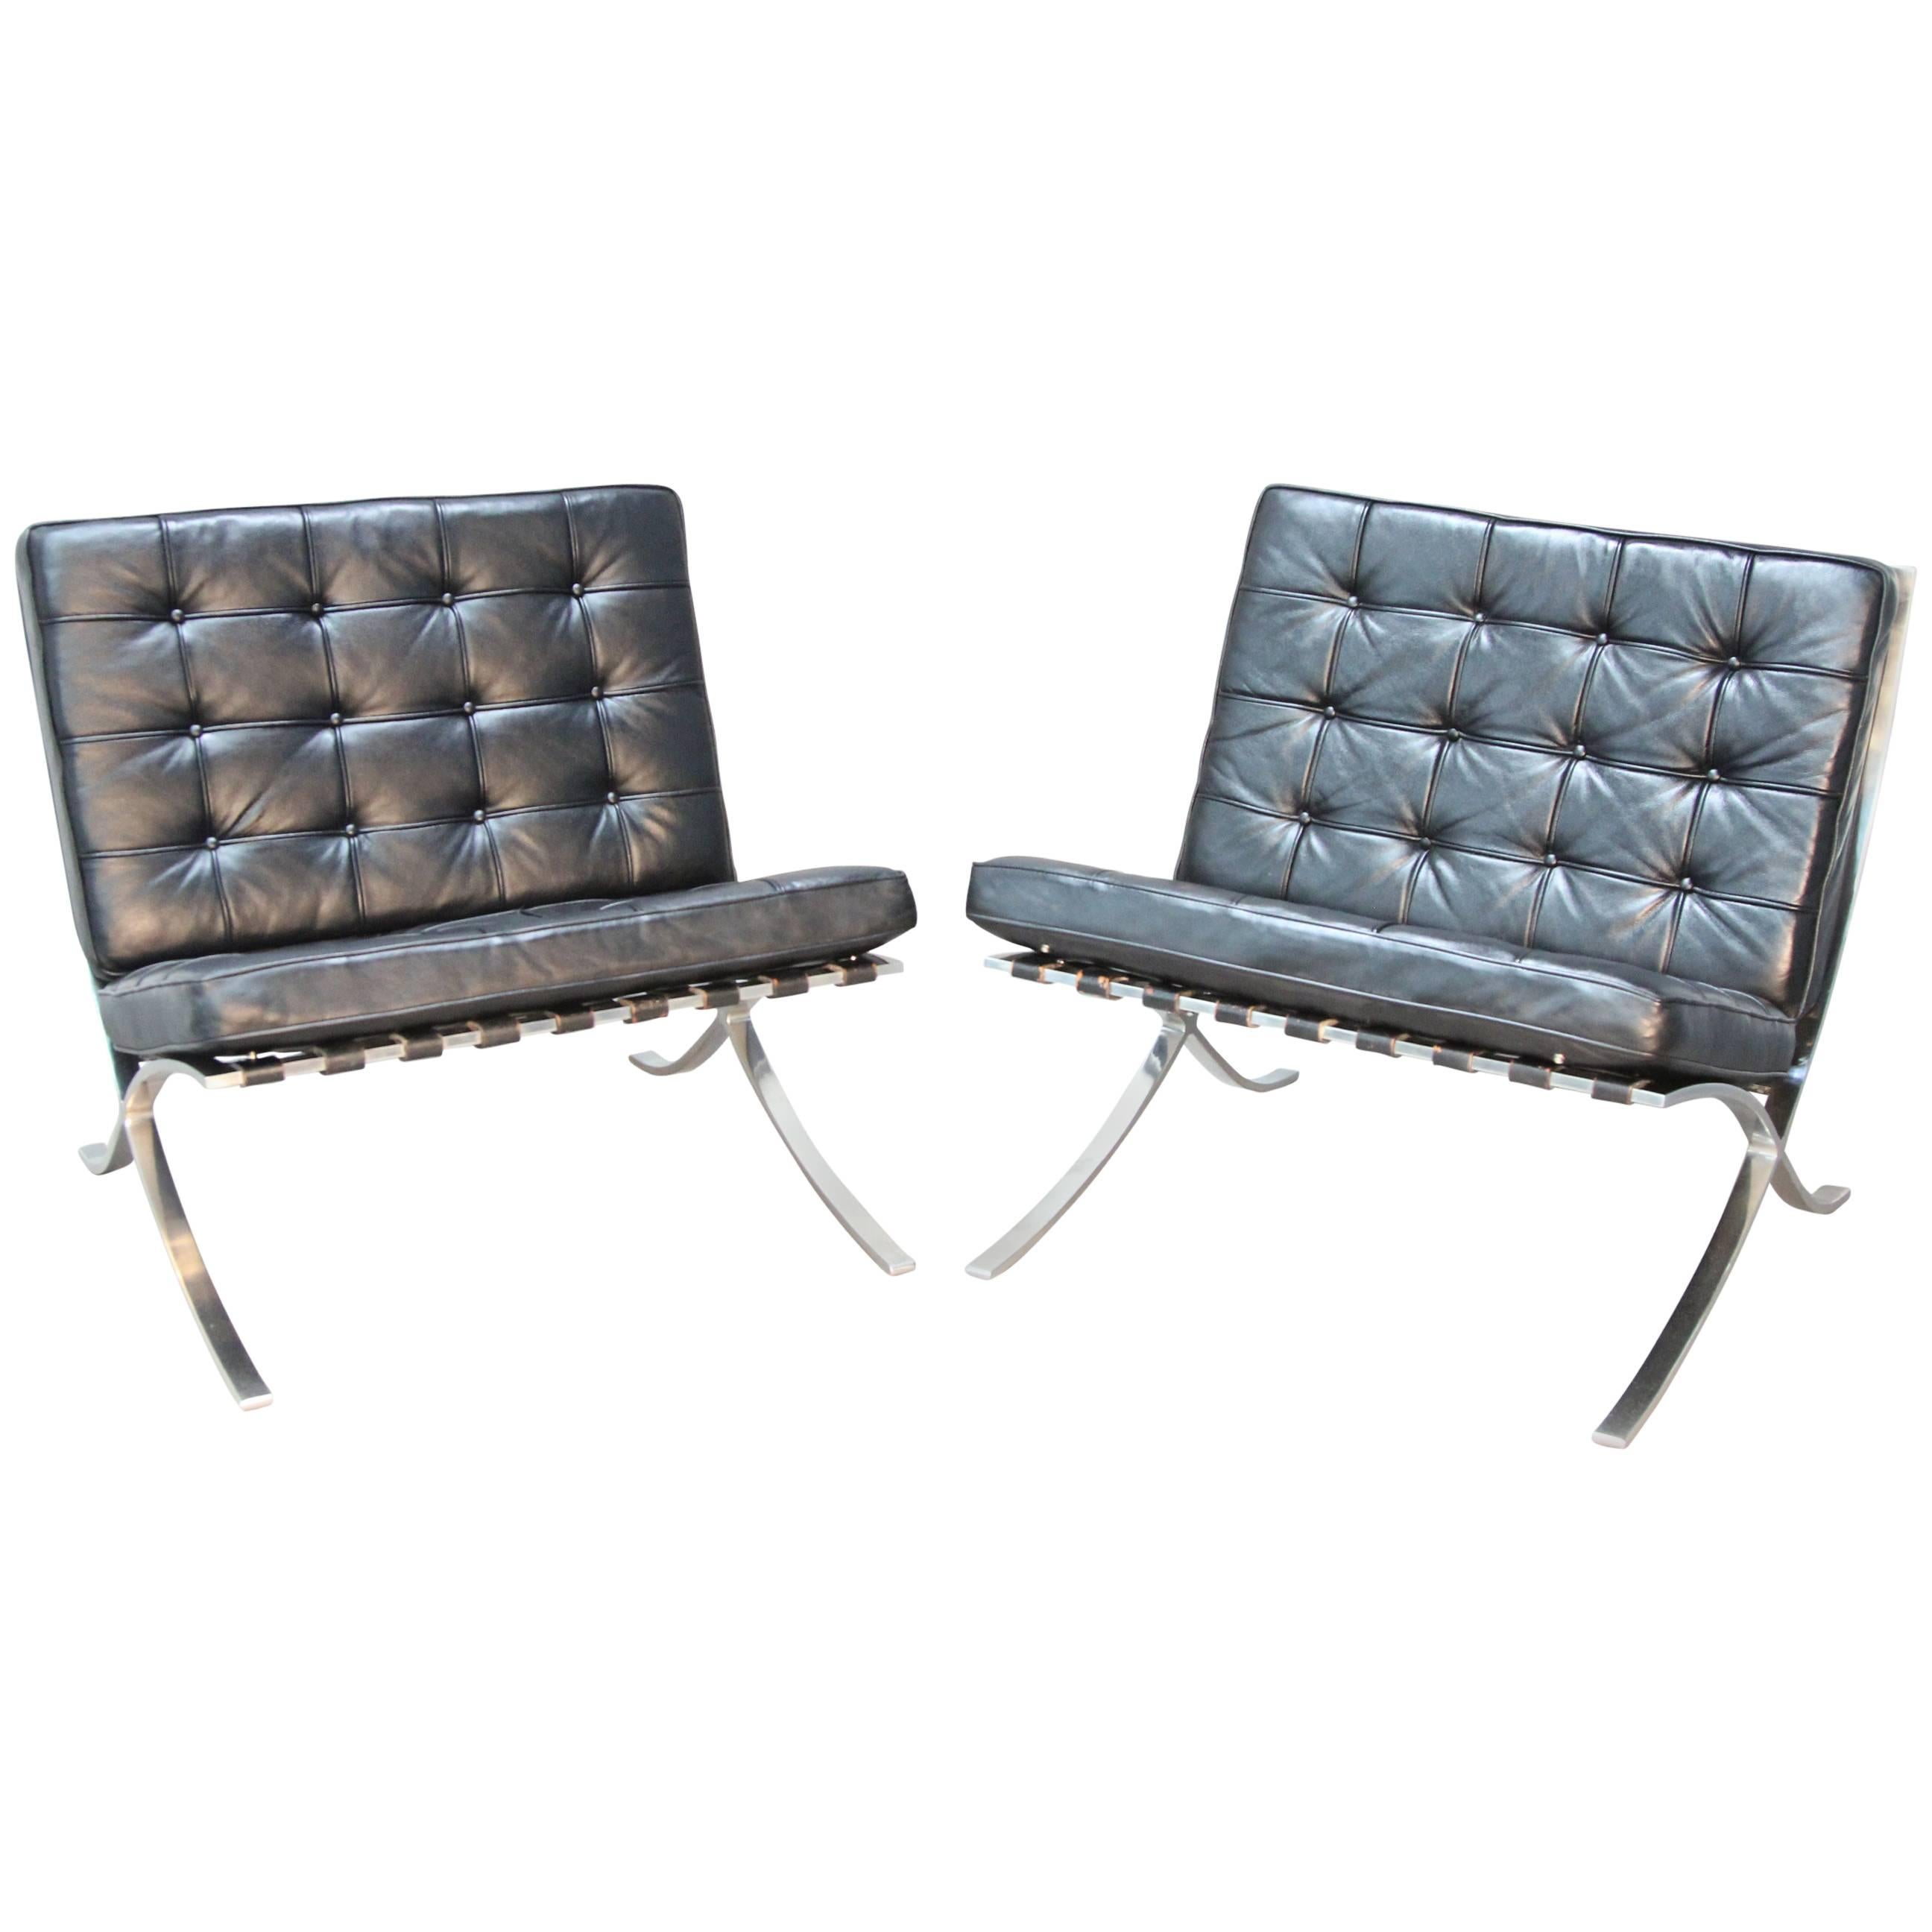 Vintage Barcelona Chairs by Mies Van Der Rohe For Sale